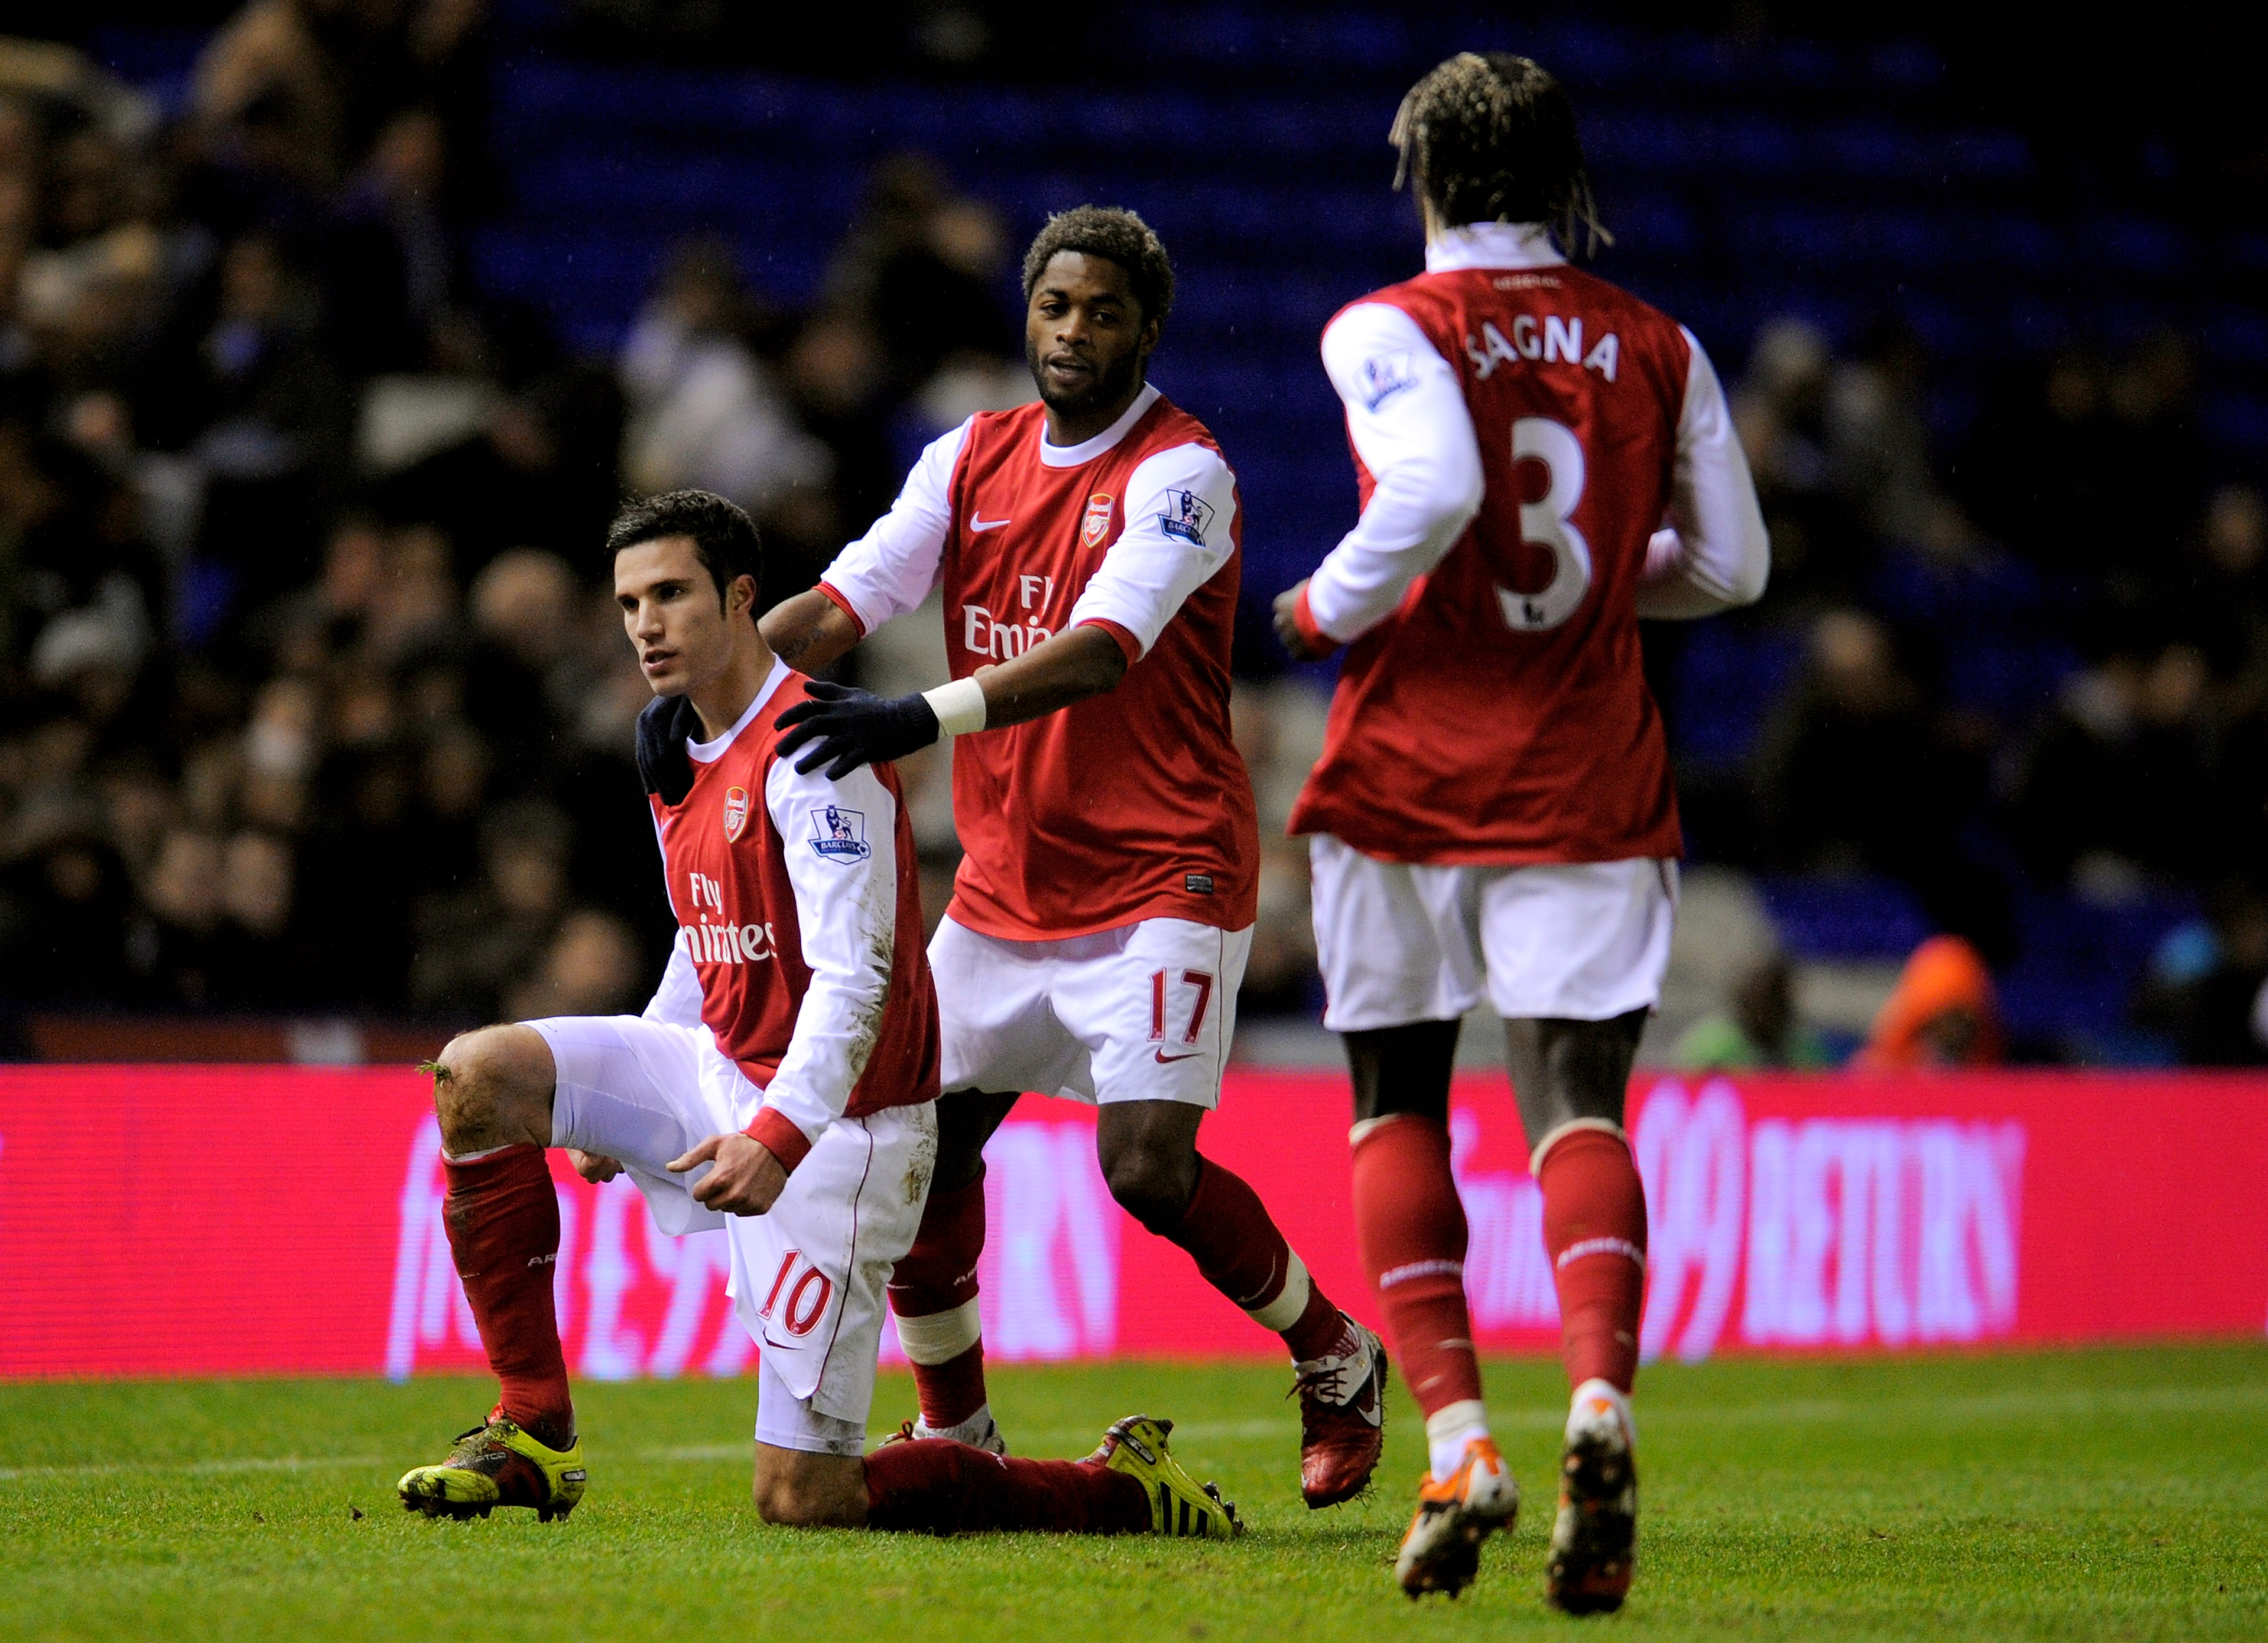 BIRMINGHAM, ENGLAND - JANUARY 01:  Robin Van Persie (L) of Arsenal is congratulated by teammates Alex Song (C) and Bacary Sagna (R) after scoring the opening goal of the match during the Barclays Premier Leaue match between Birmingham City and Arsenal at